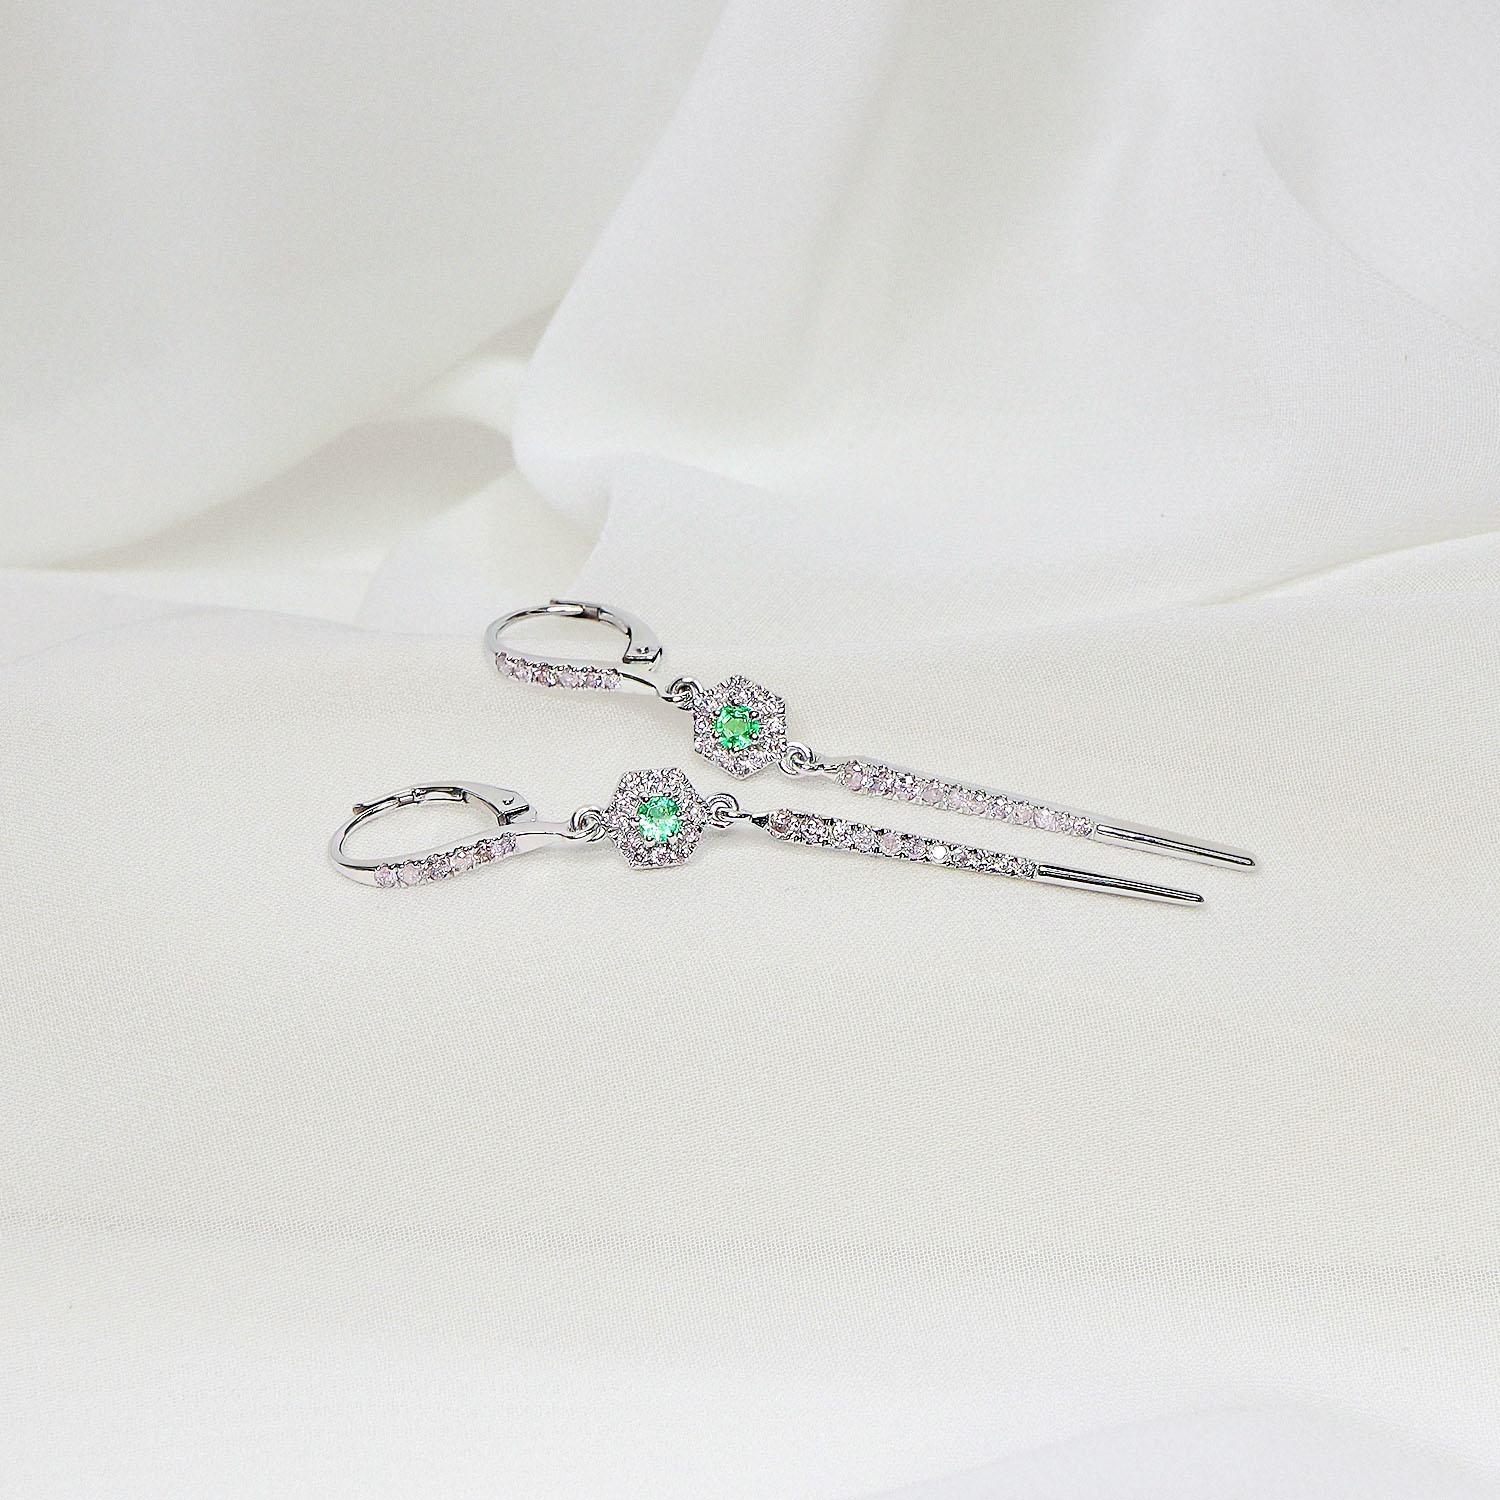 *14K 0.65 ct Natural Pink Diamonds&Emerald Fashion Drop Earrings*

This band features a stunning contemporary design with natural pink diamonds weighing 0.79 ct and natural emeralds weighing 0.21 ct. 

Main Stone
Variety: Natural Diamond
Shape: